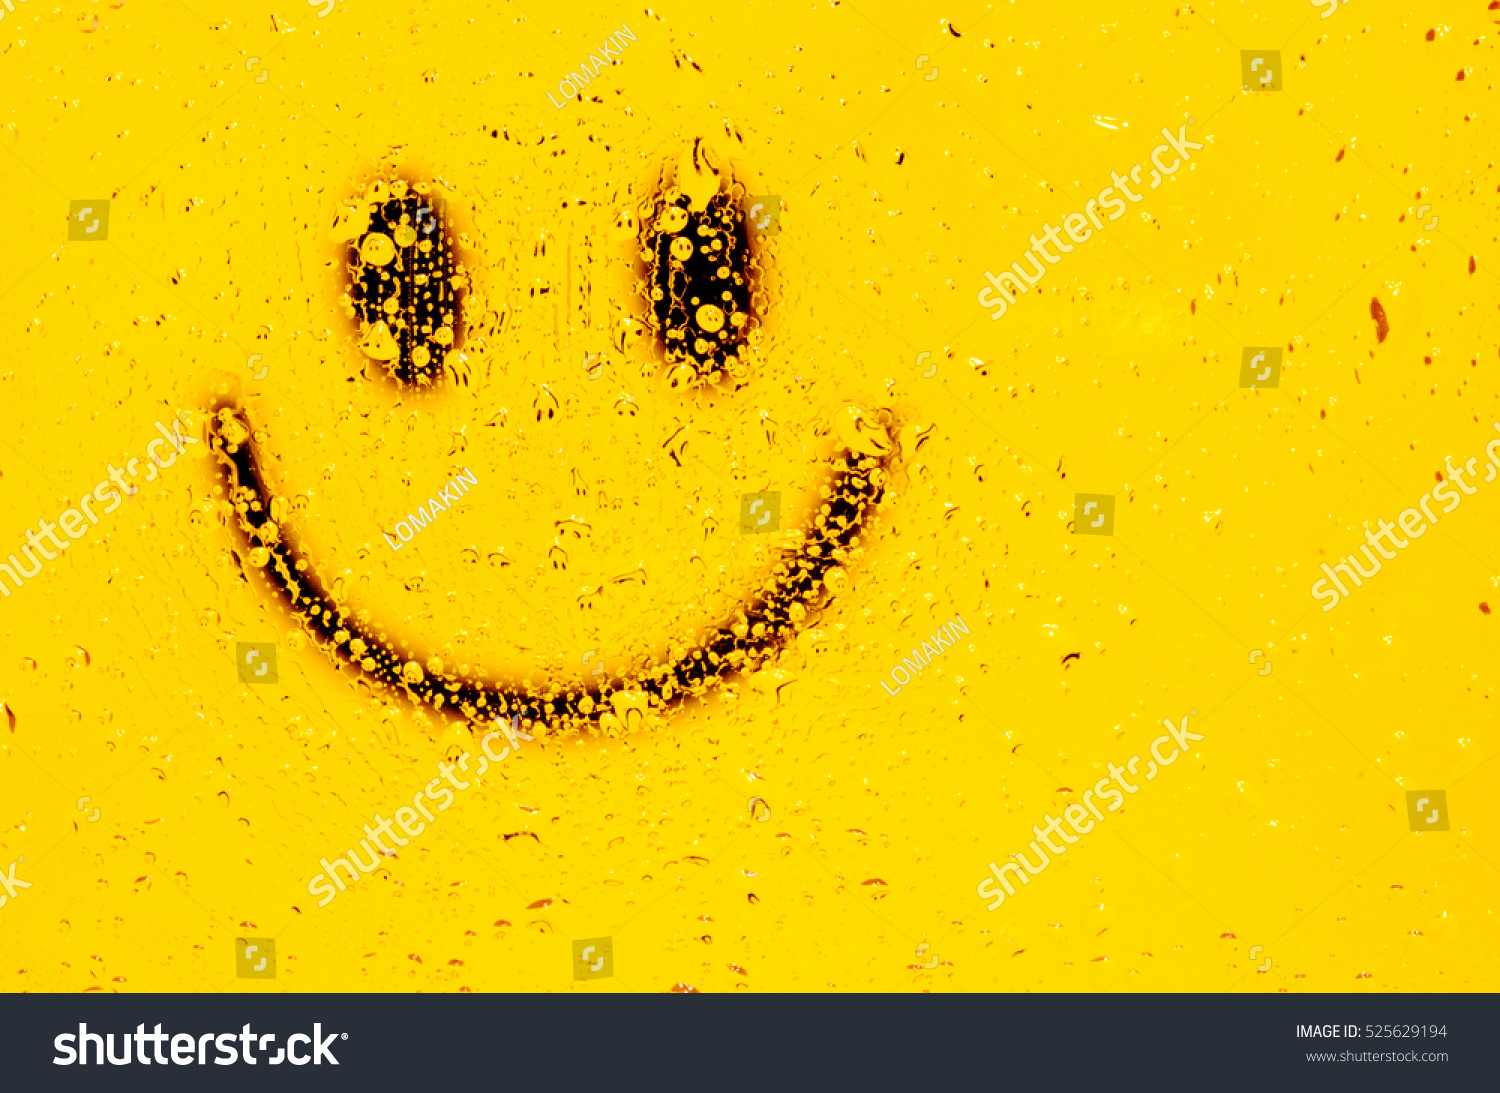 Smiley Face Yellow Smile Poster World Stock Photo Edit Now